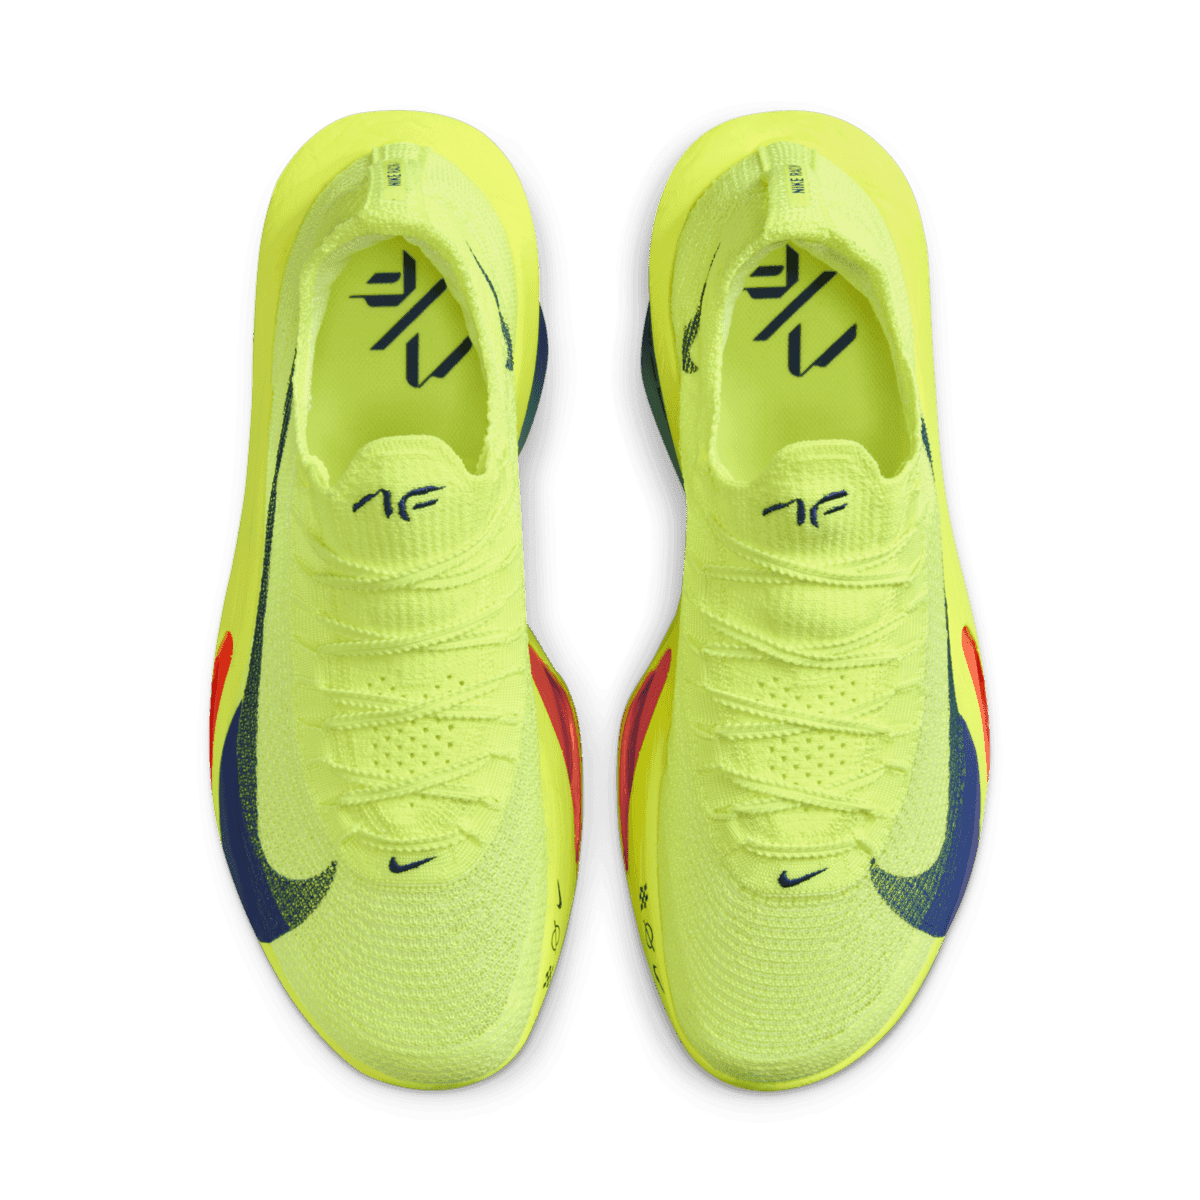 Check out the Nike Alphafly 3 in a 'Volt' colorway - Sneakerjagers